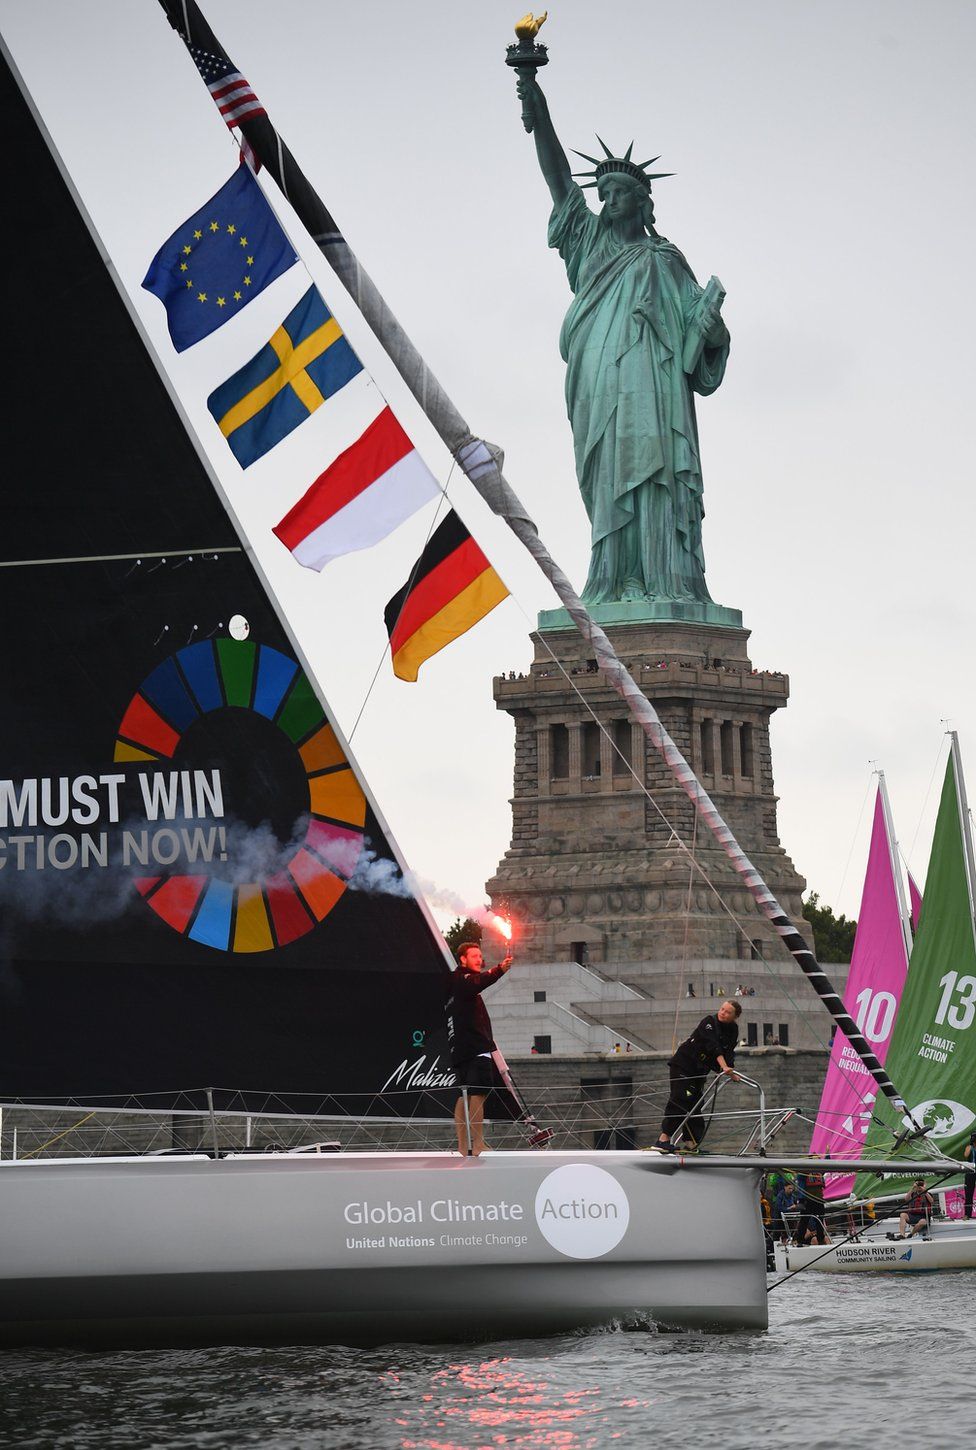 Greta Thunberg arrives in the US on a yacht, passing the Statue of Liberty